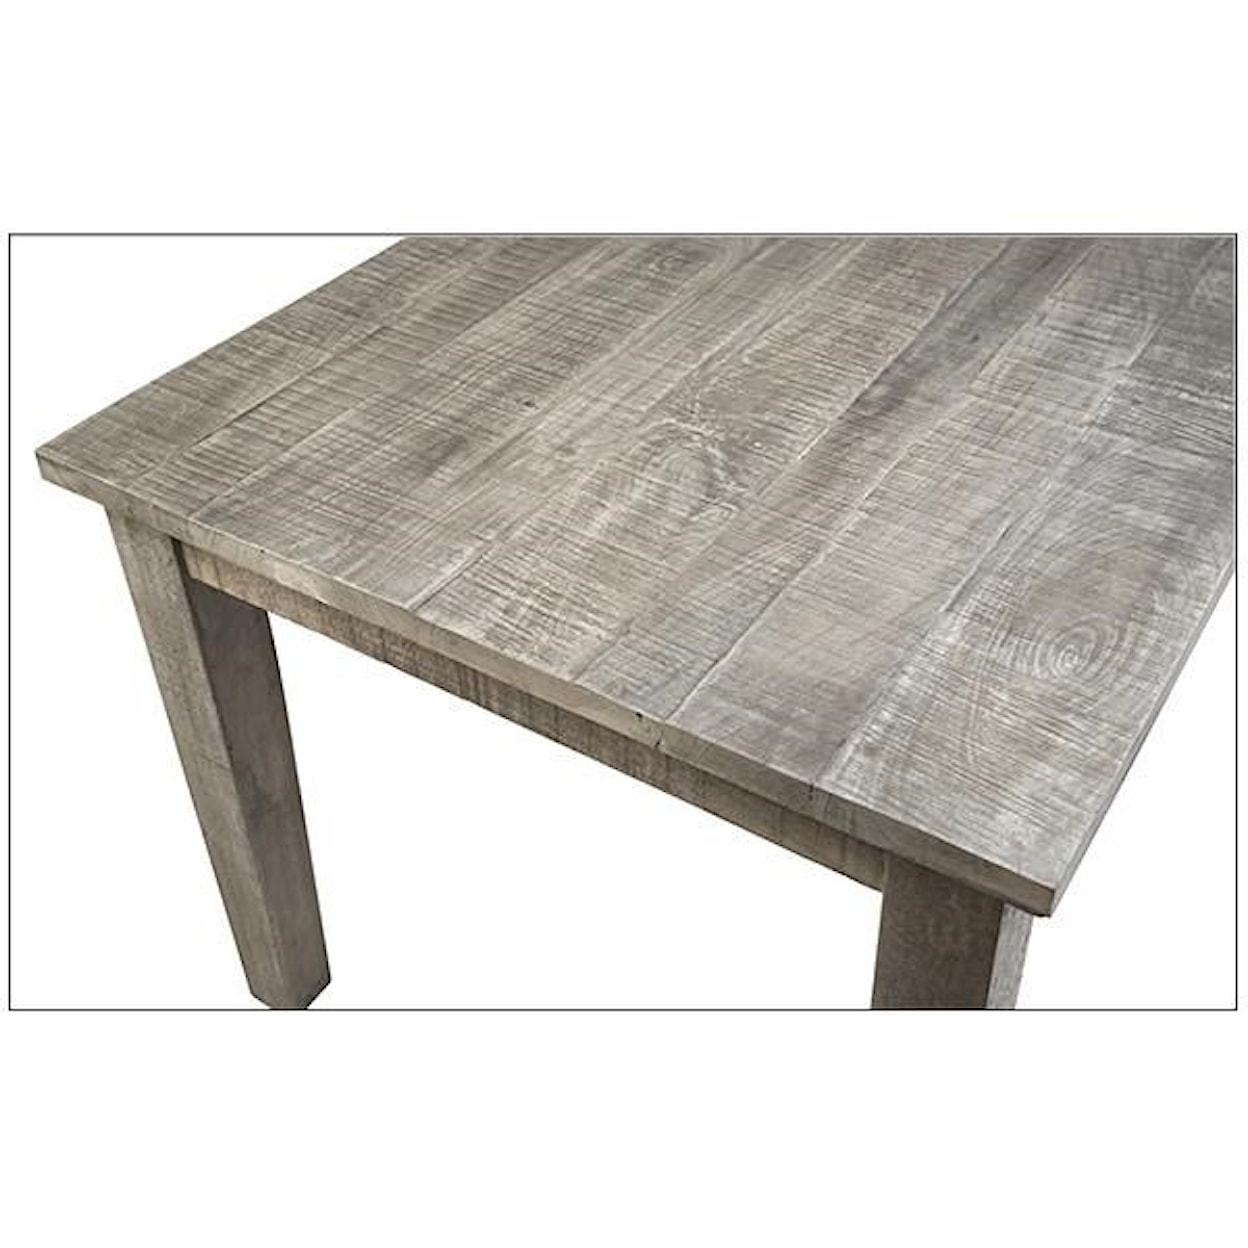 Dovetail Furniture Dining Tables Zion Dining Table